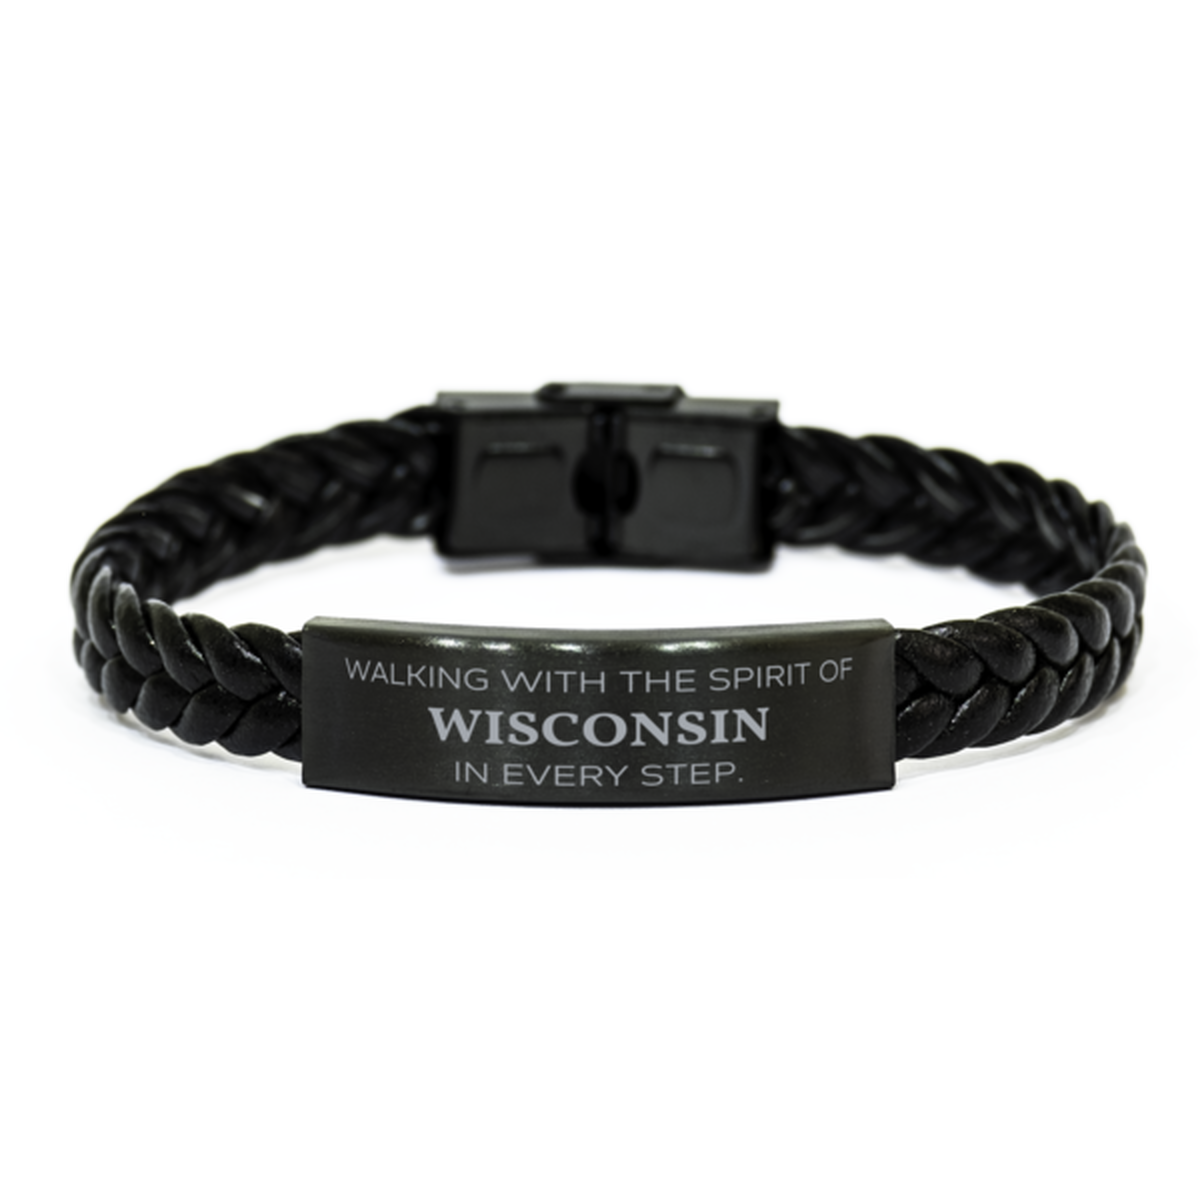 Wisconsin Gifts, Walking with the spirit, Love Wisconsin Birthday Christmas Braided Leather Bracelet For Wisconsin People, Men, Women, Friends